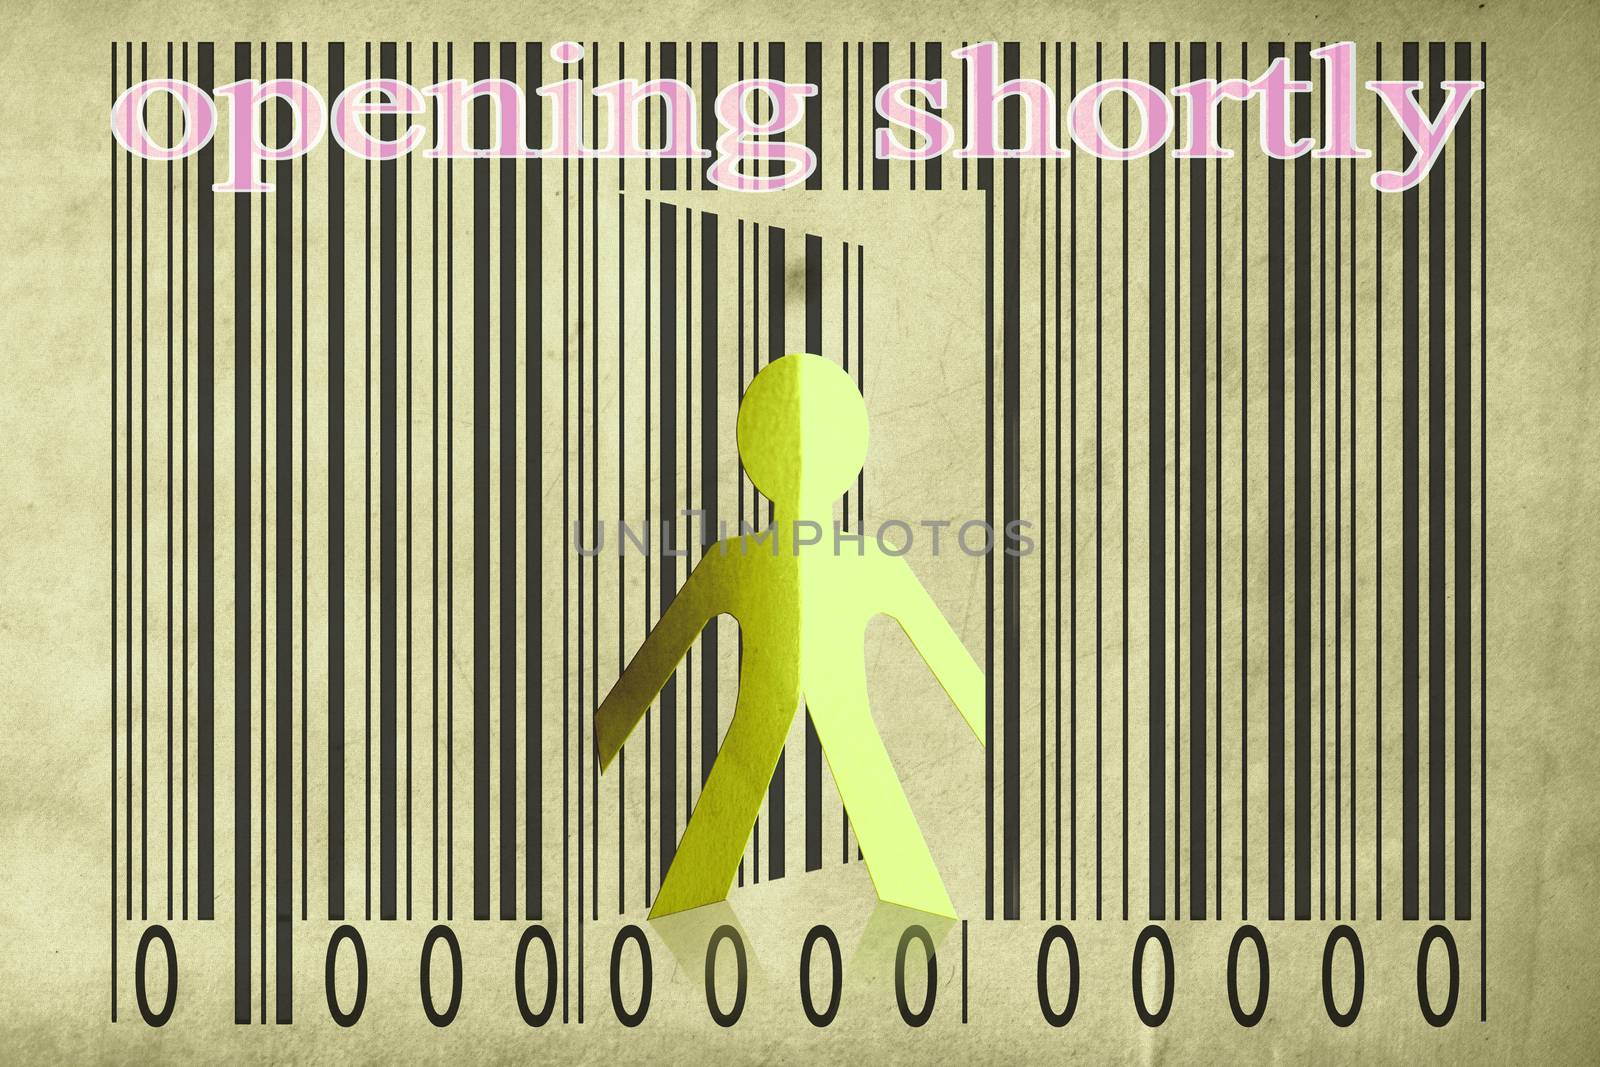 Paperman coming out of a bar code with Opening shortly Words